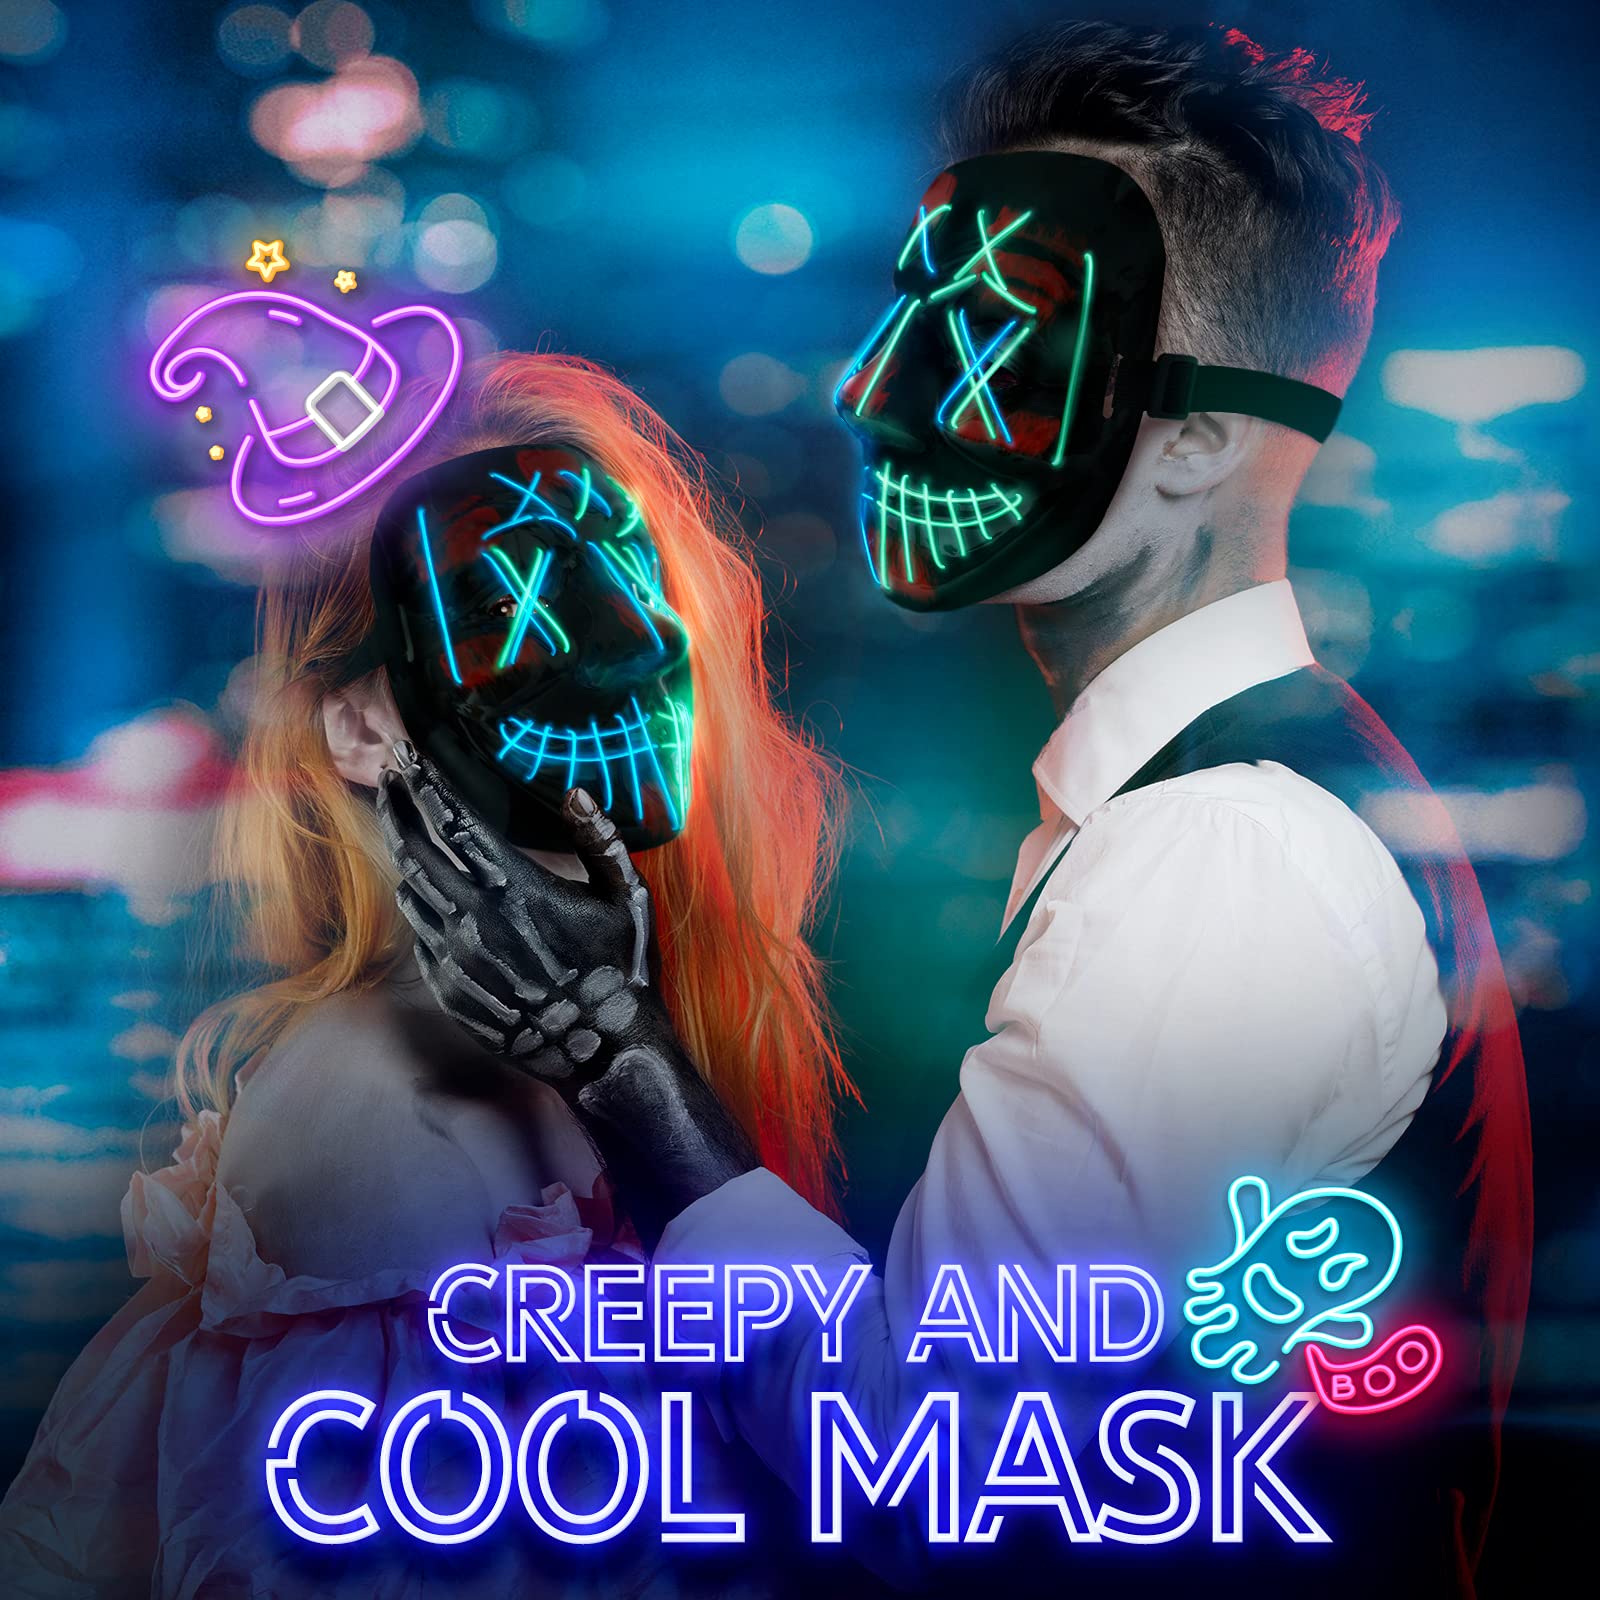 LED Purge Mask Halloween Costume - 3 Modes Scary Light Up Mask for Men Women Kids Glowing Mask for Halloween Cosplay